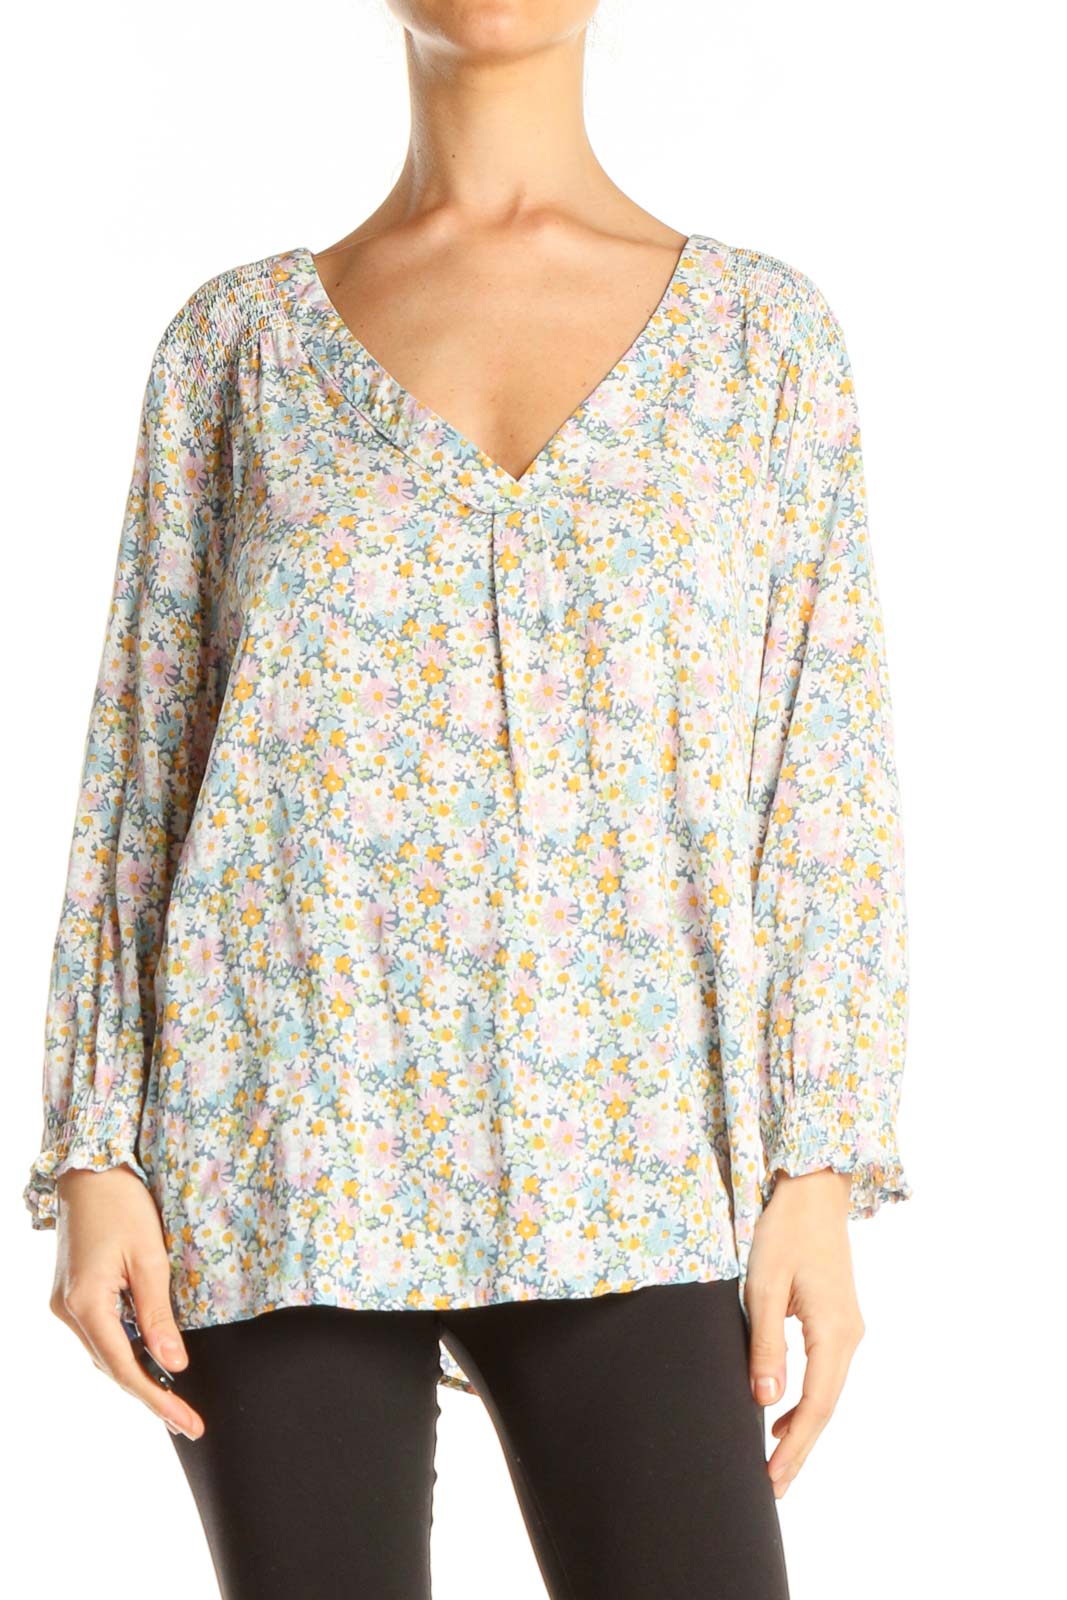 Multicolor Floral Print All Day Wear Blouse Front